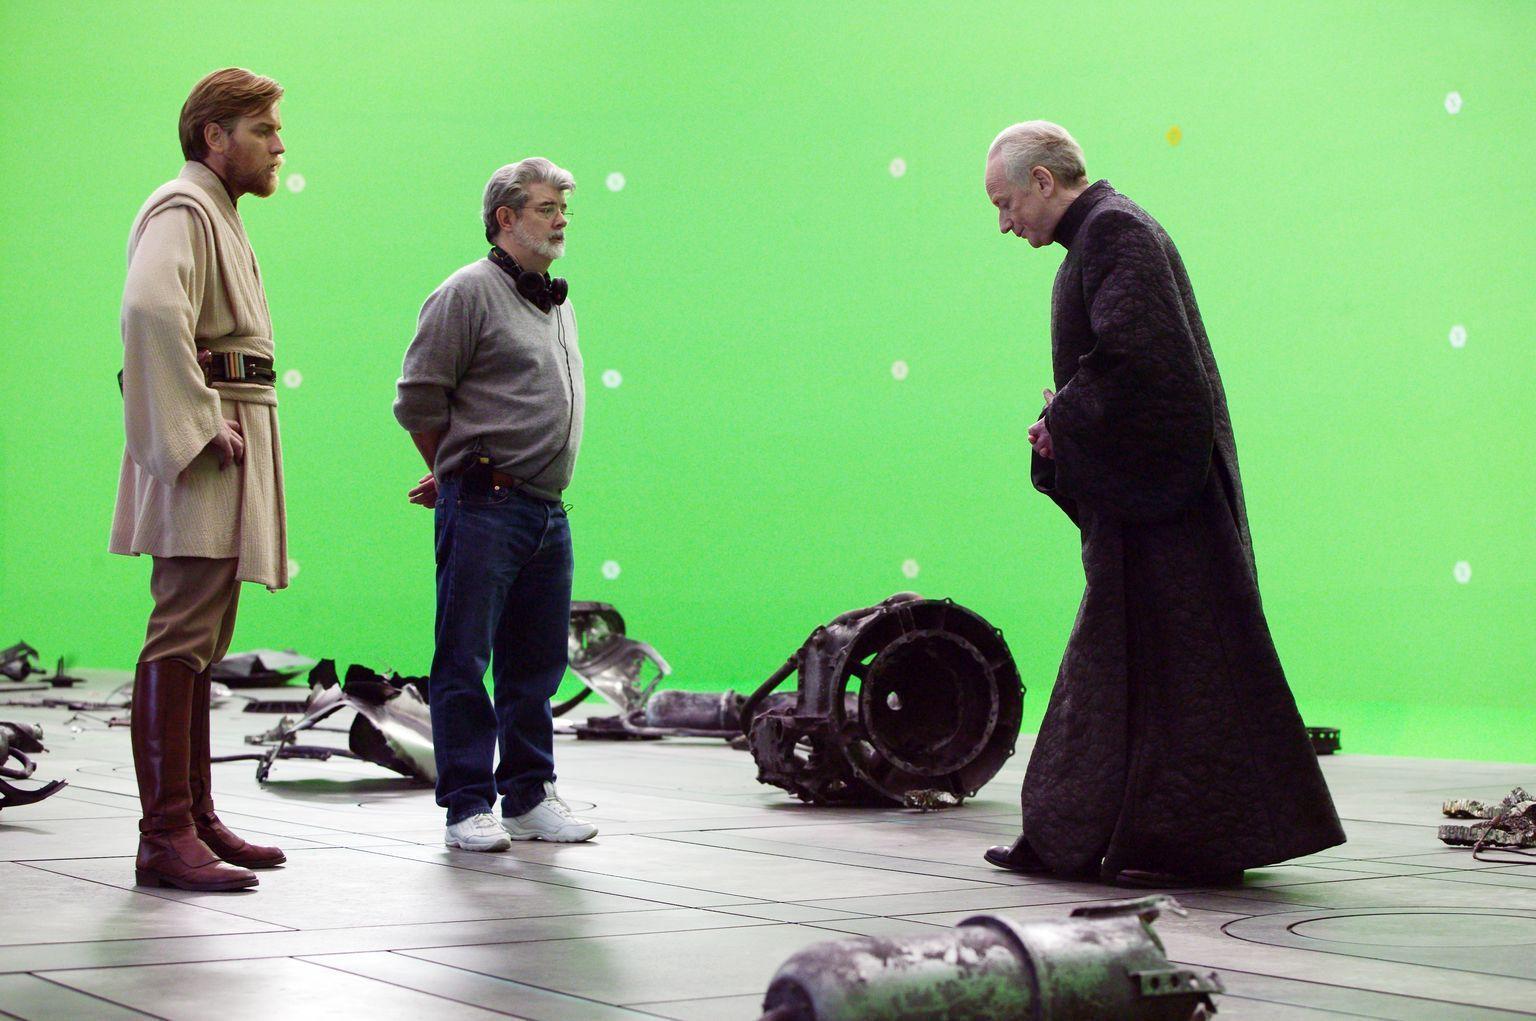 Image gallery for Star Wars: Episode III Revenge of the Sith - FilmAffinity